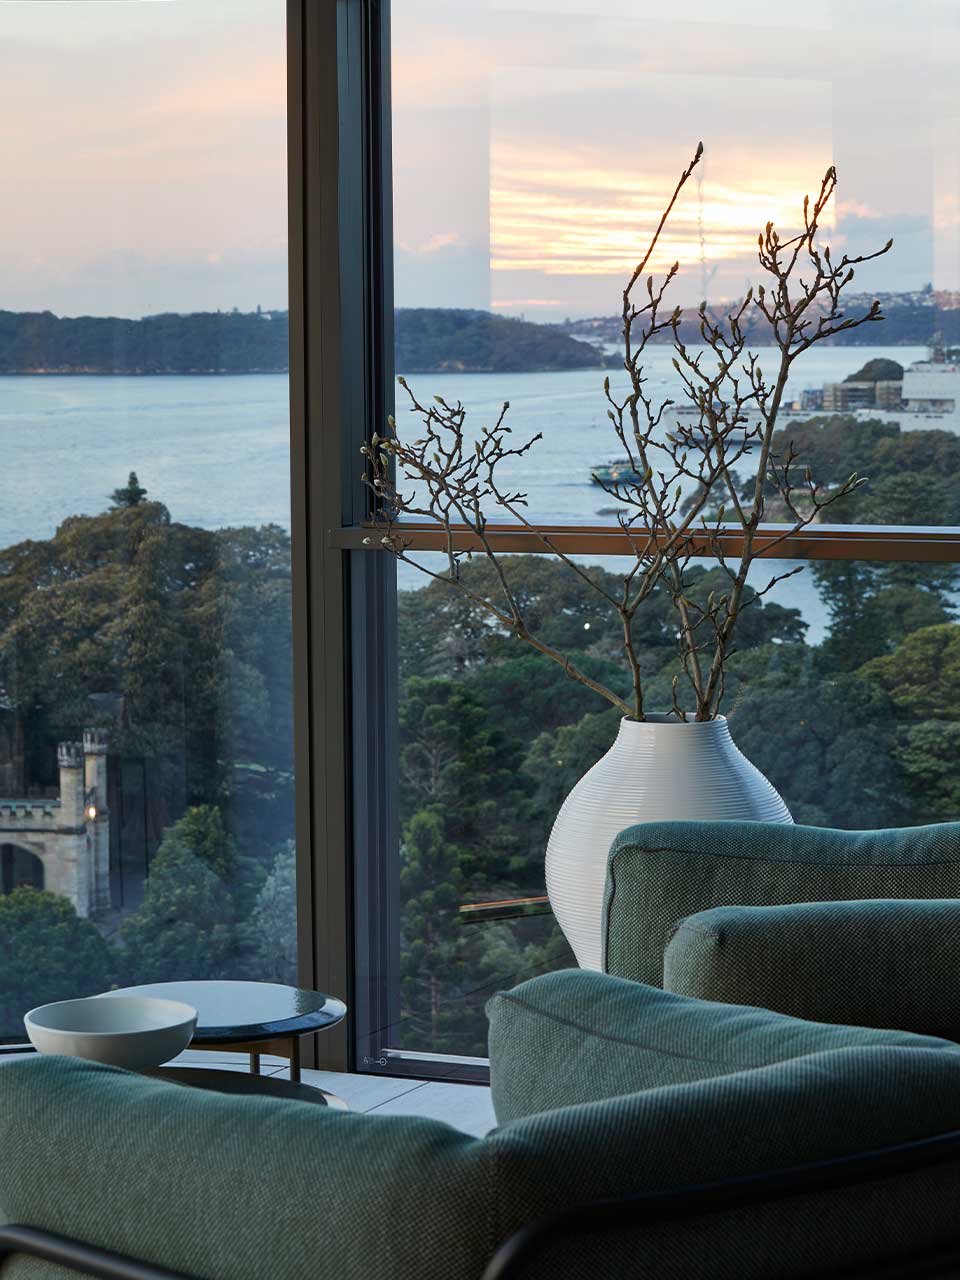 As the sun sets in the window reflection, after-work drinks are enjoyed in the B&B Italia Borea armchair.